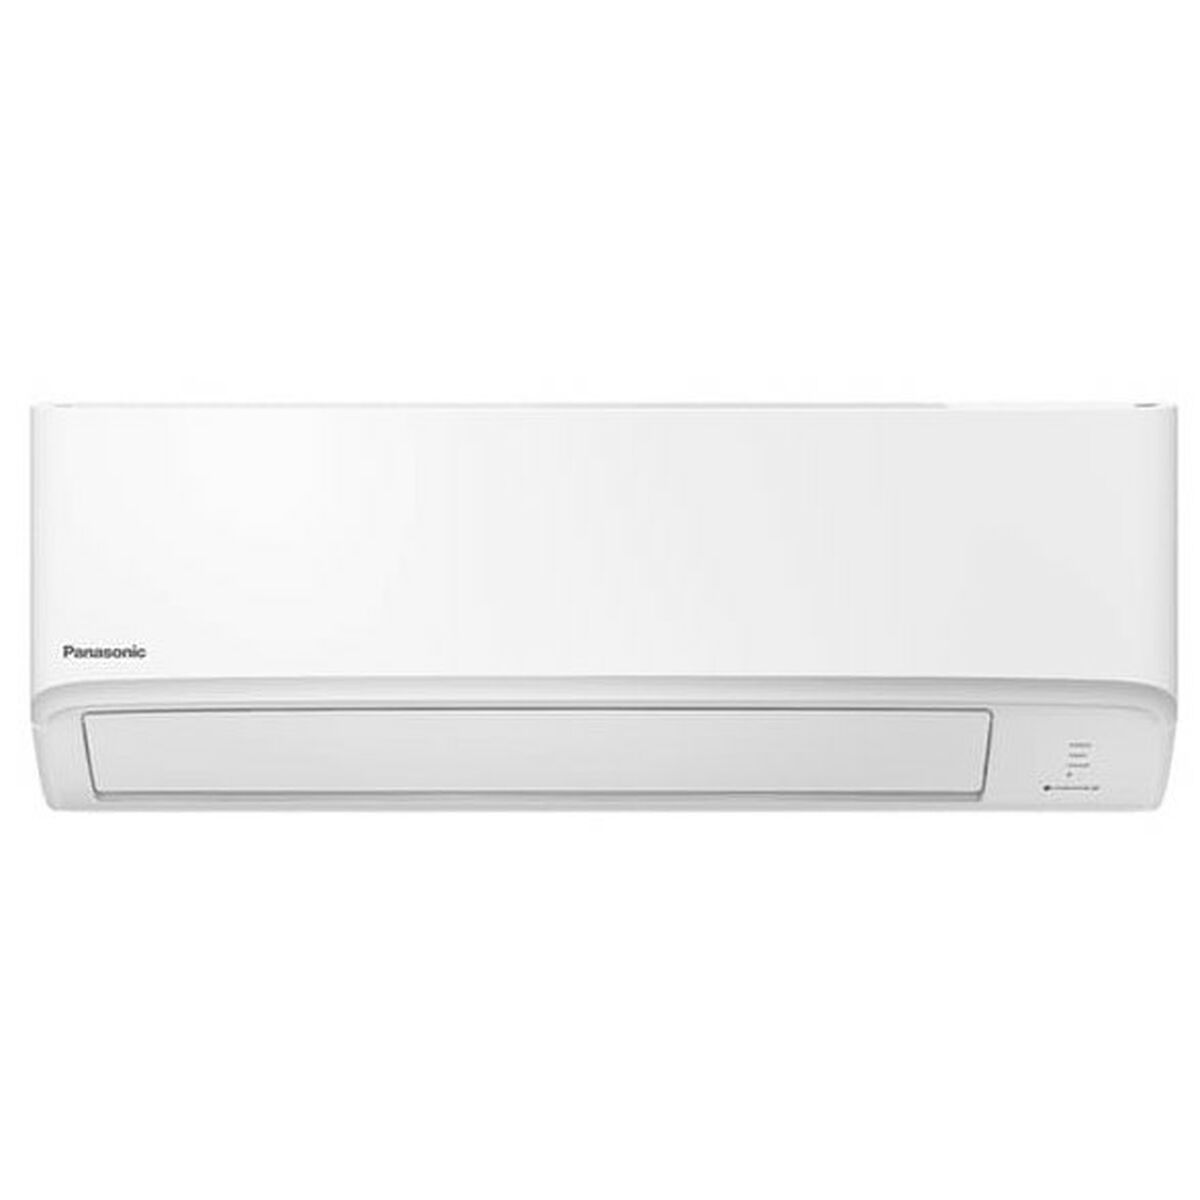 Air Conditioning Panasonic KITTZ25ZKE White A+ A++ 5000 W, Panasonic, Home and cooking, Portable air conditioning, air-conditioning-panasonic-kittz25zke-white-a-a-5000-w, Brand_Panasonic, category-reference-2399, category-reference-2450, category-reference-2451, category-reference-t-19656, category-reference-t-21087, category-reference-t-25214, category-reference-t-29111, Condition_NEW, ferretería, Price_800 - 900, summer, RiotNook